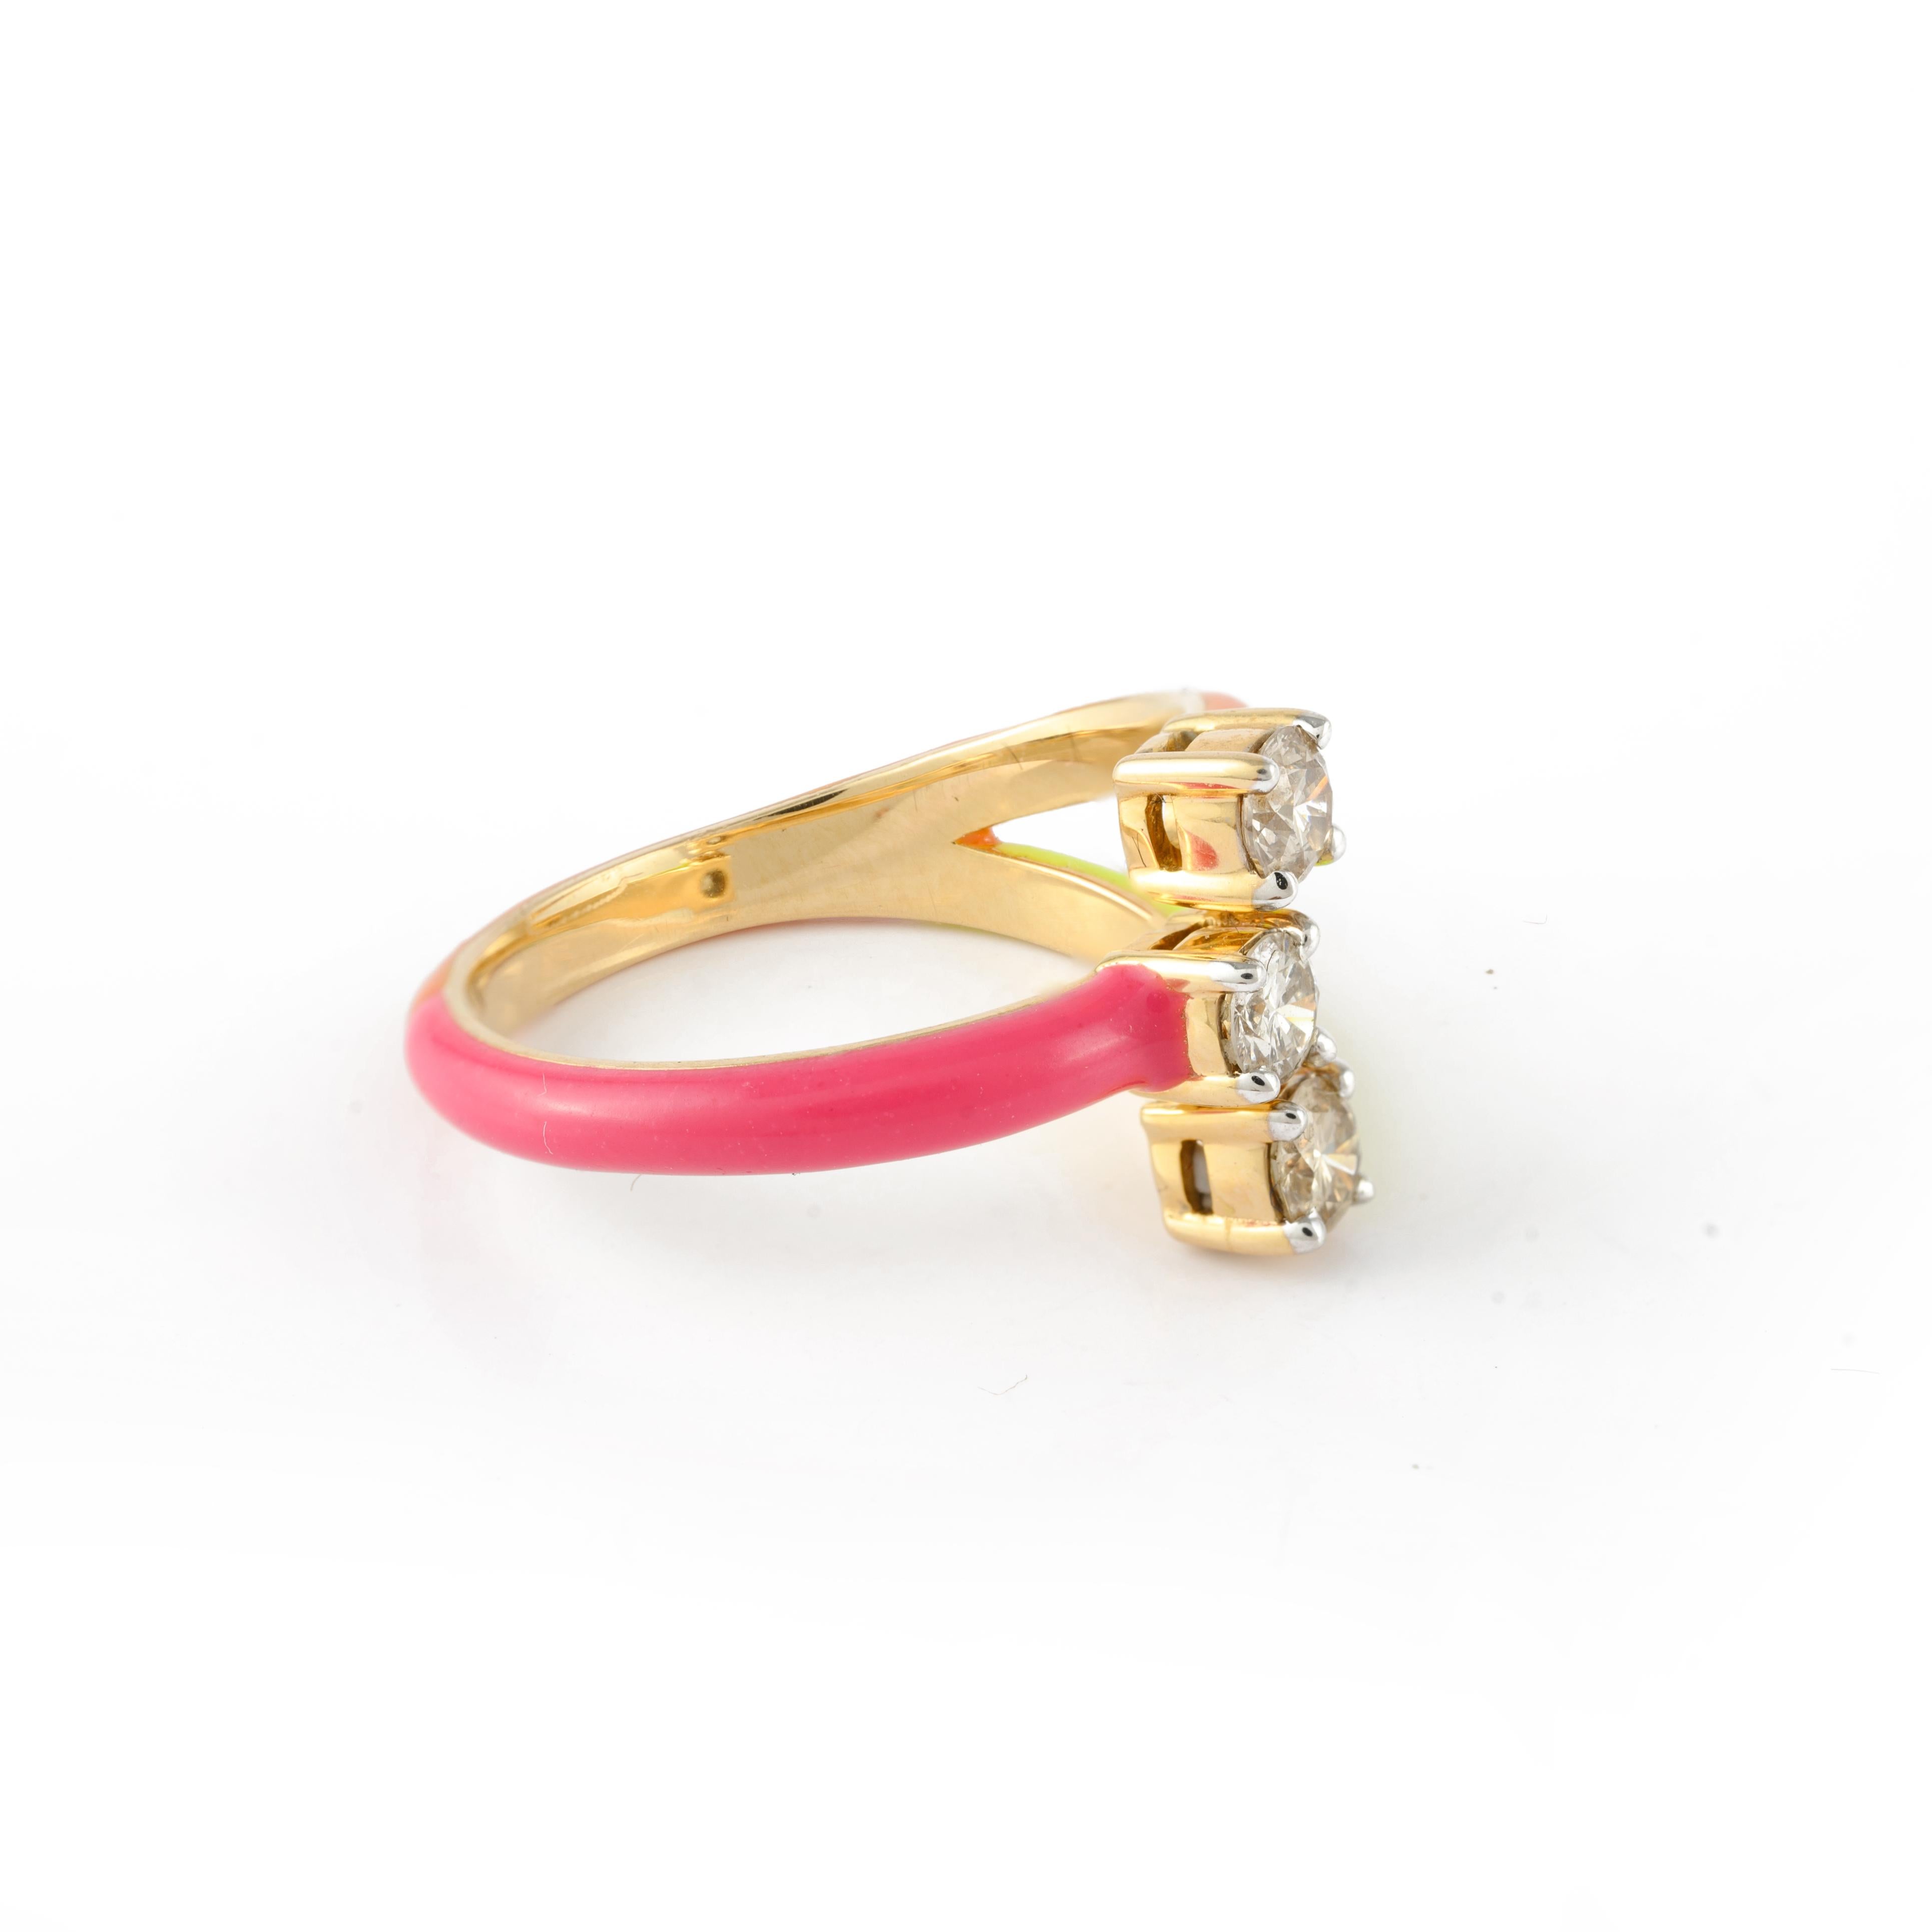 For Sale:  Bright Color Enamel and Diamond Adjustable Ring in 14k Solid Yellow Gold 7